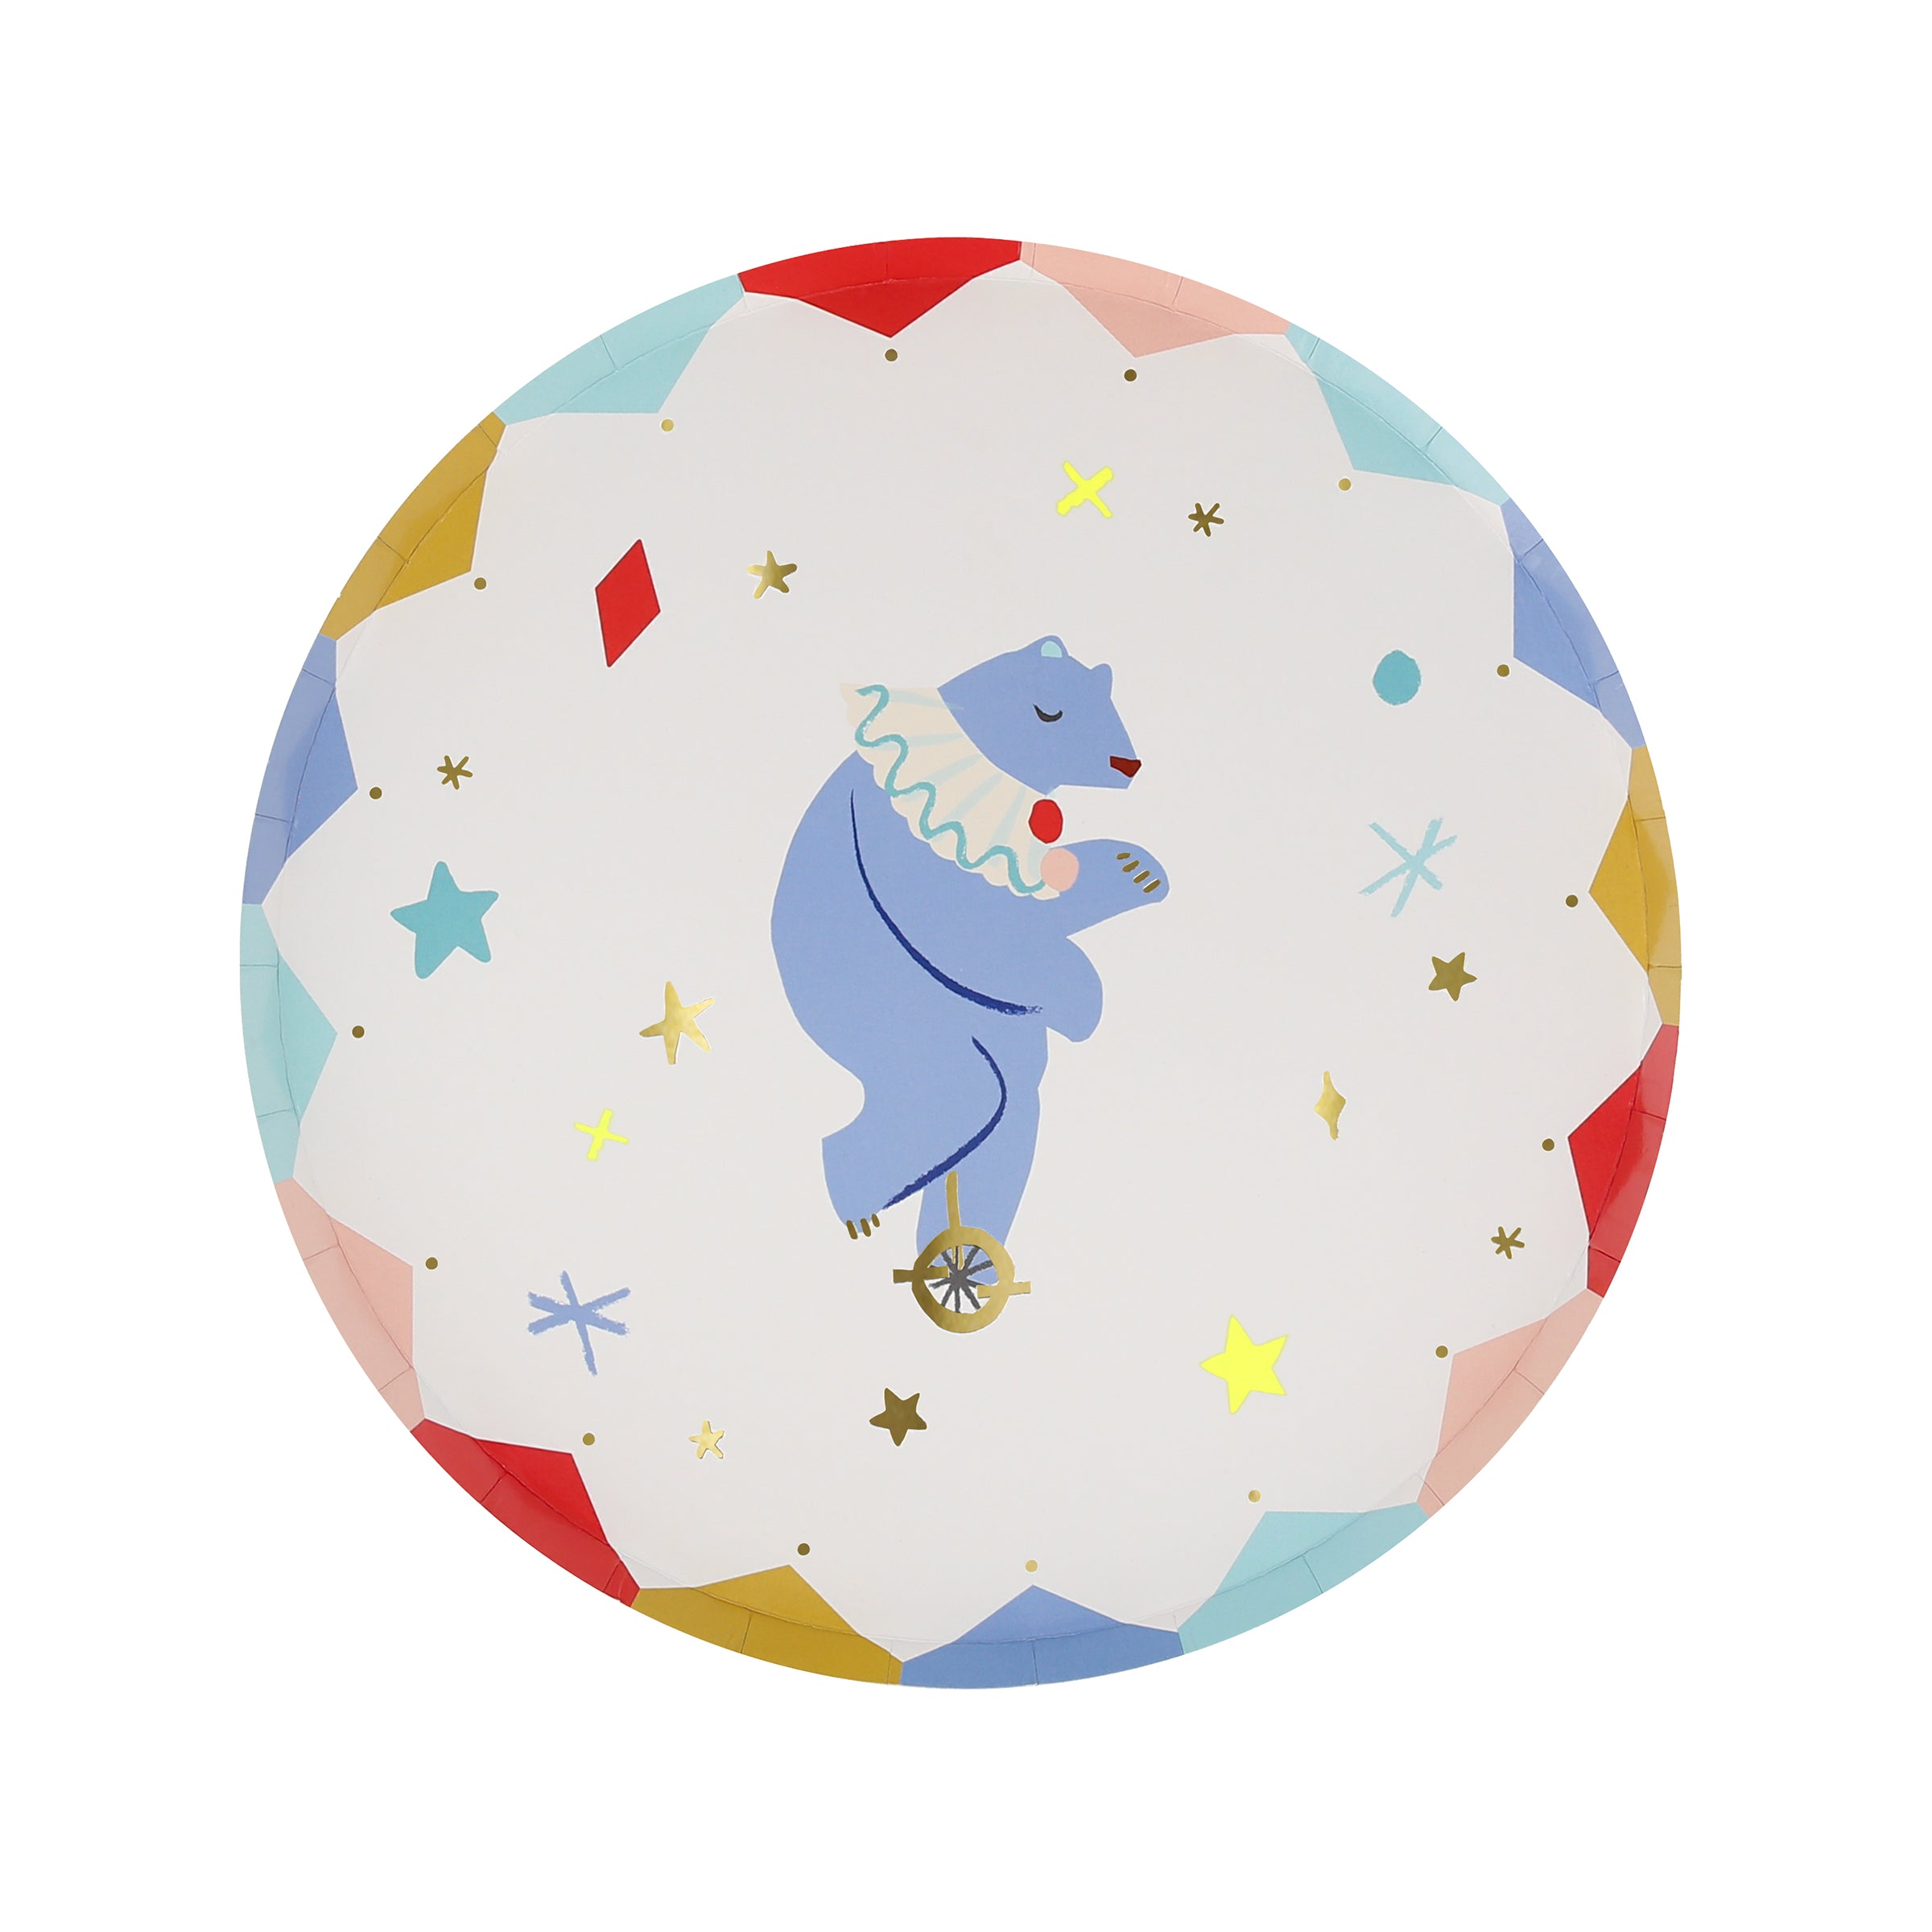 Make your circus party look amazing with our circus side plates each featuring classic circus characters .